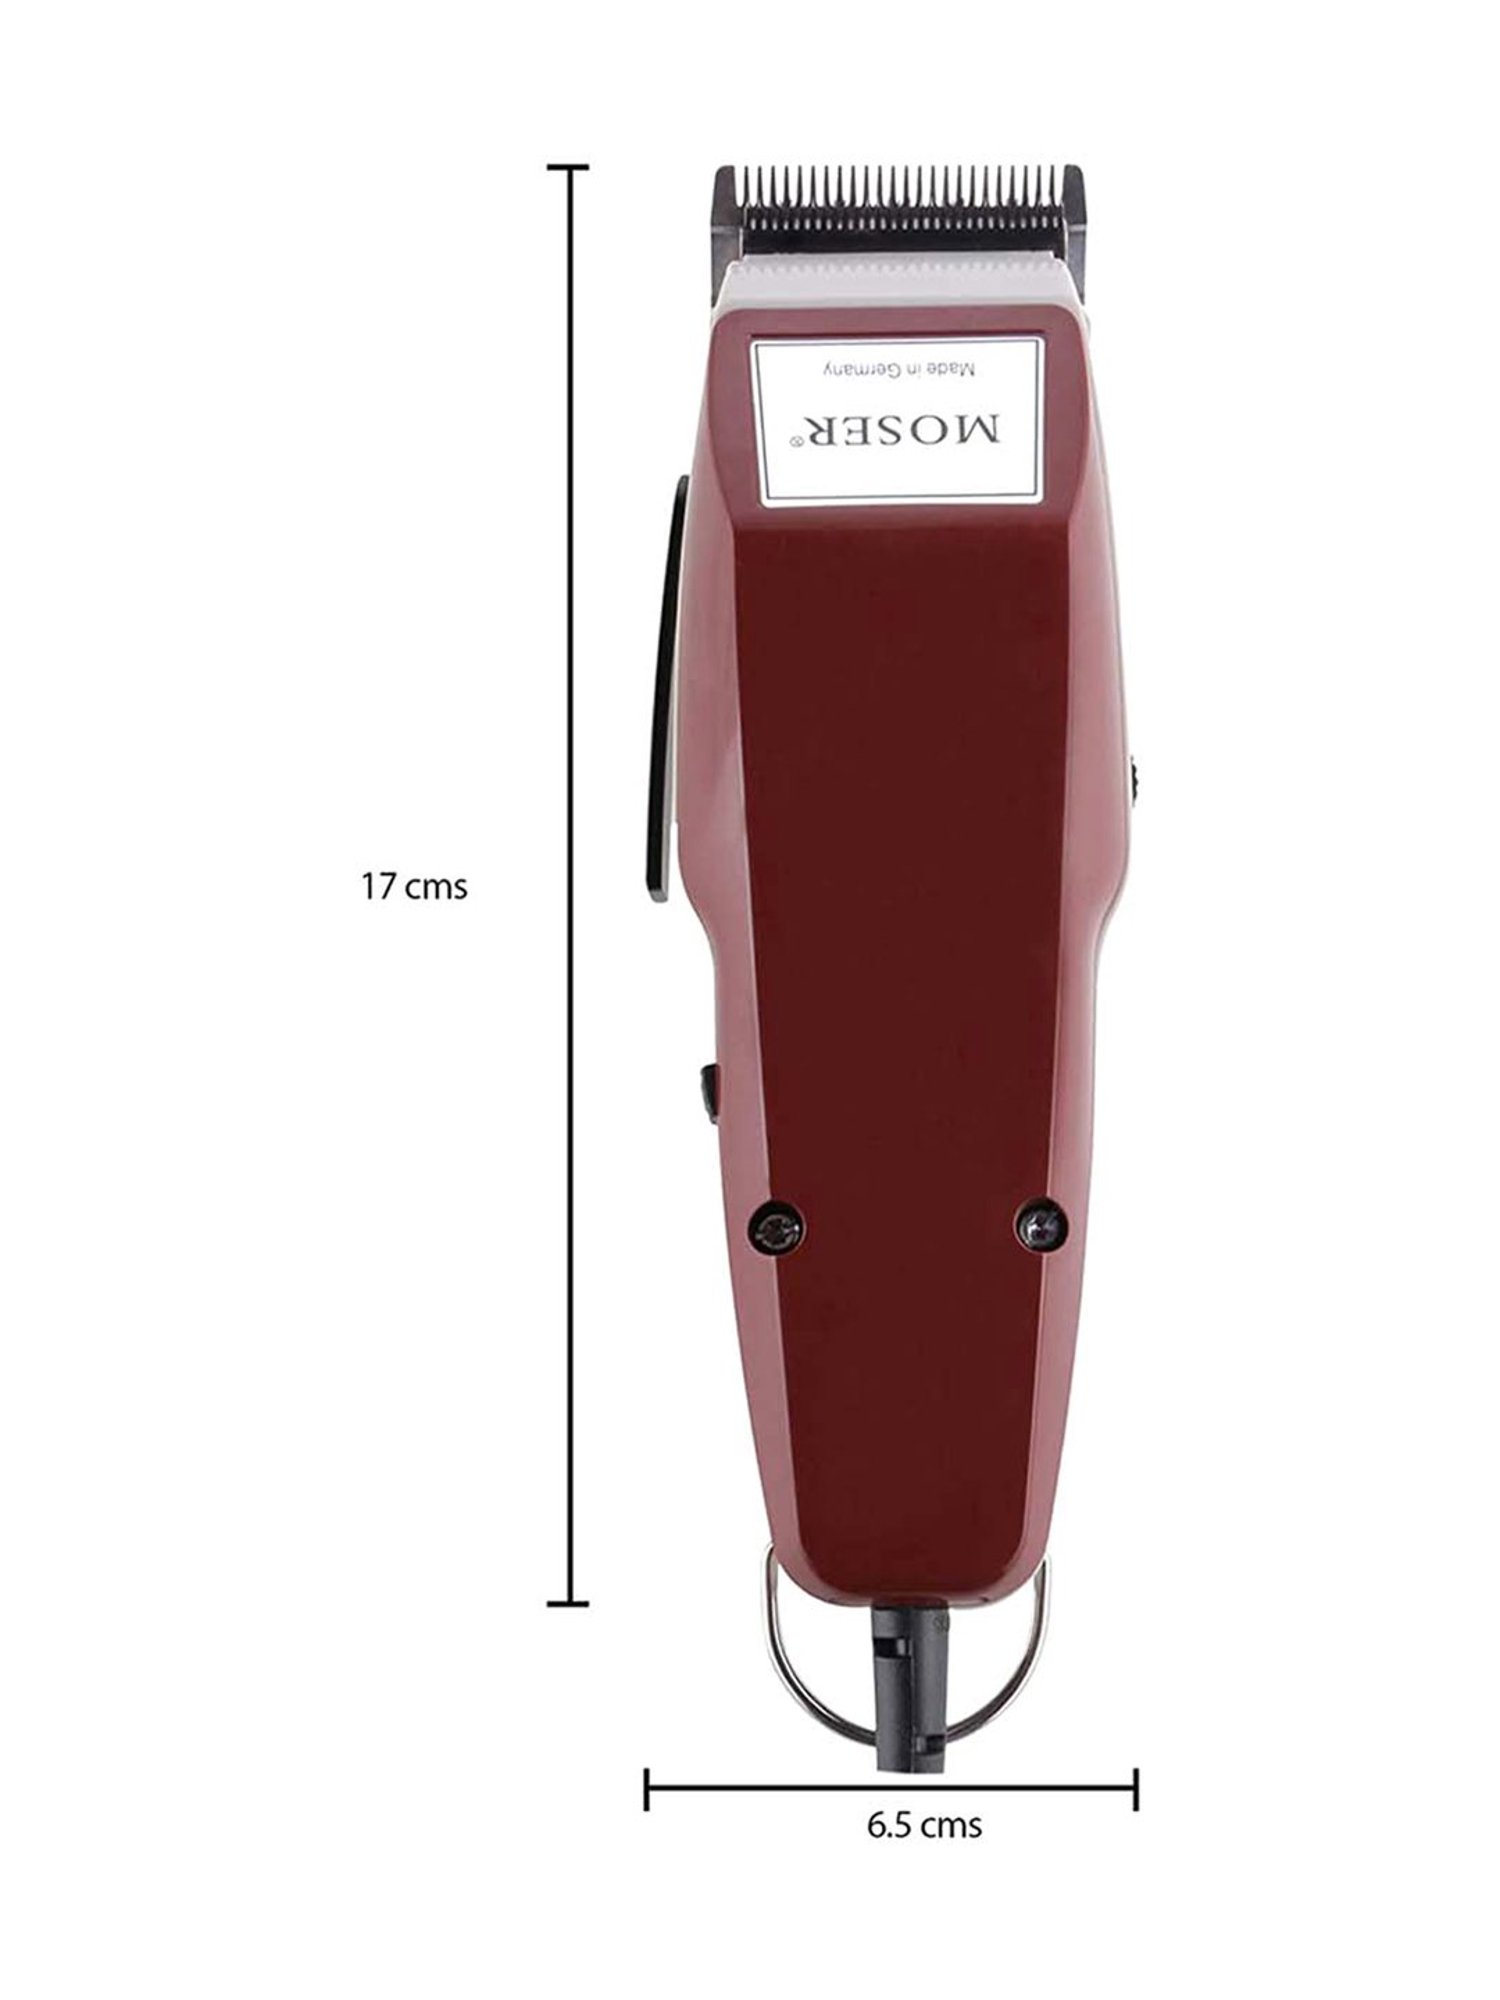 Moser 1400 Mini Hair Clipper Professional Barber Classic Corded Red